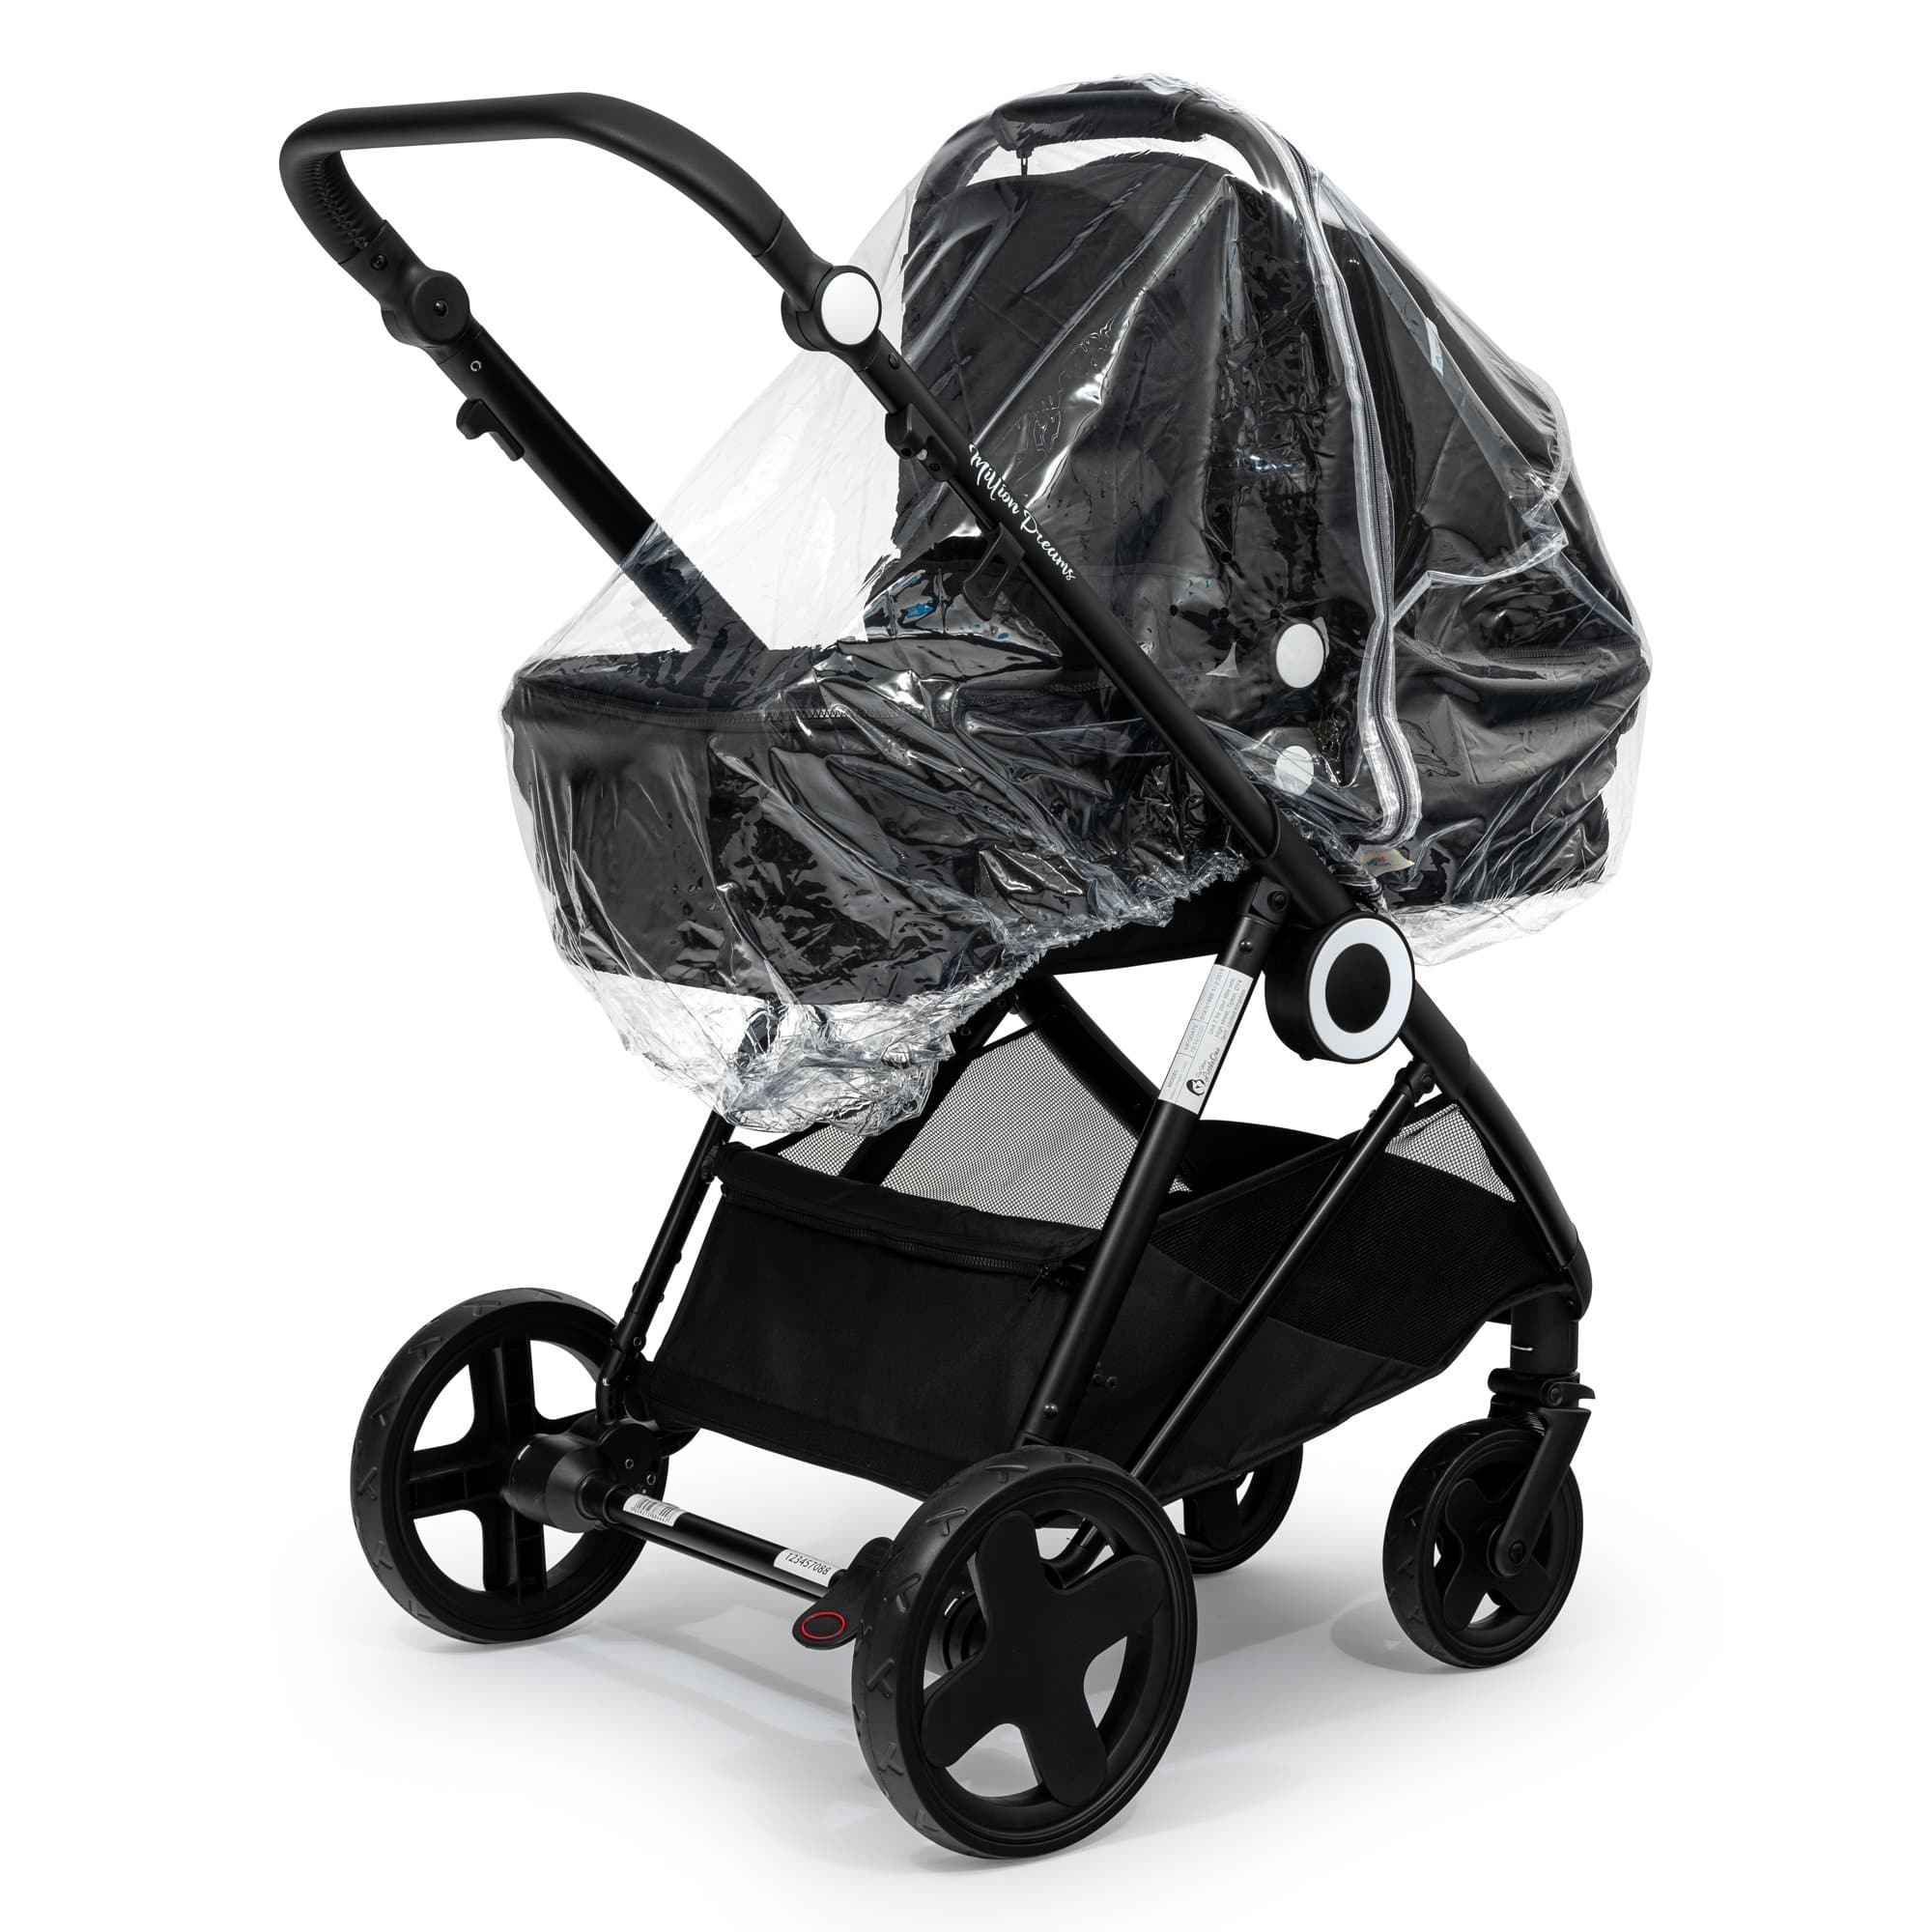 2 in 1 Rain Cover Compatible with Recaro - Fits All Models - For Your Little One